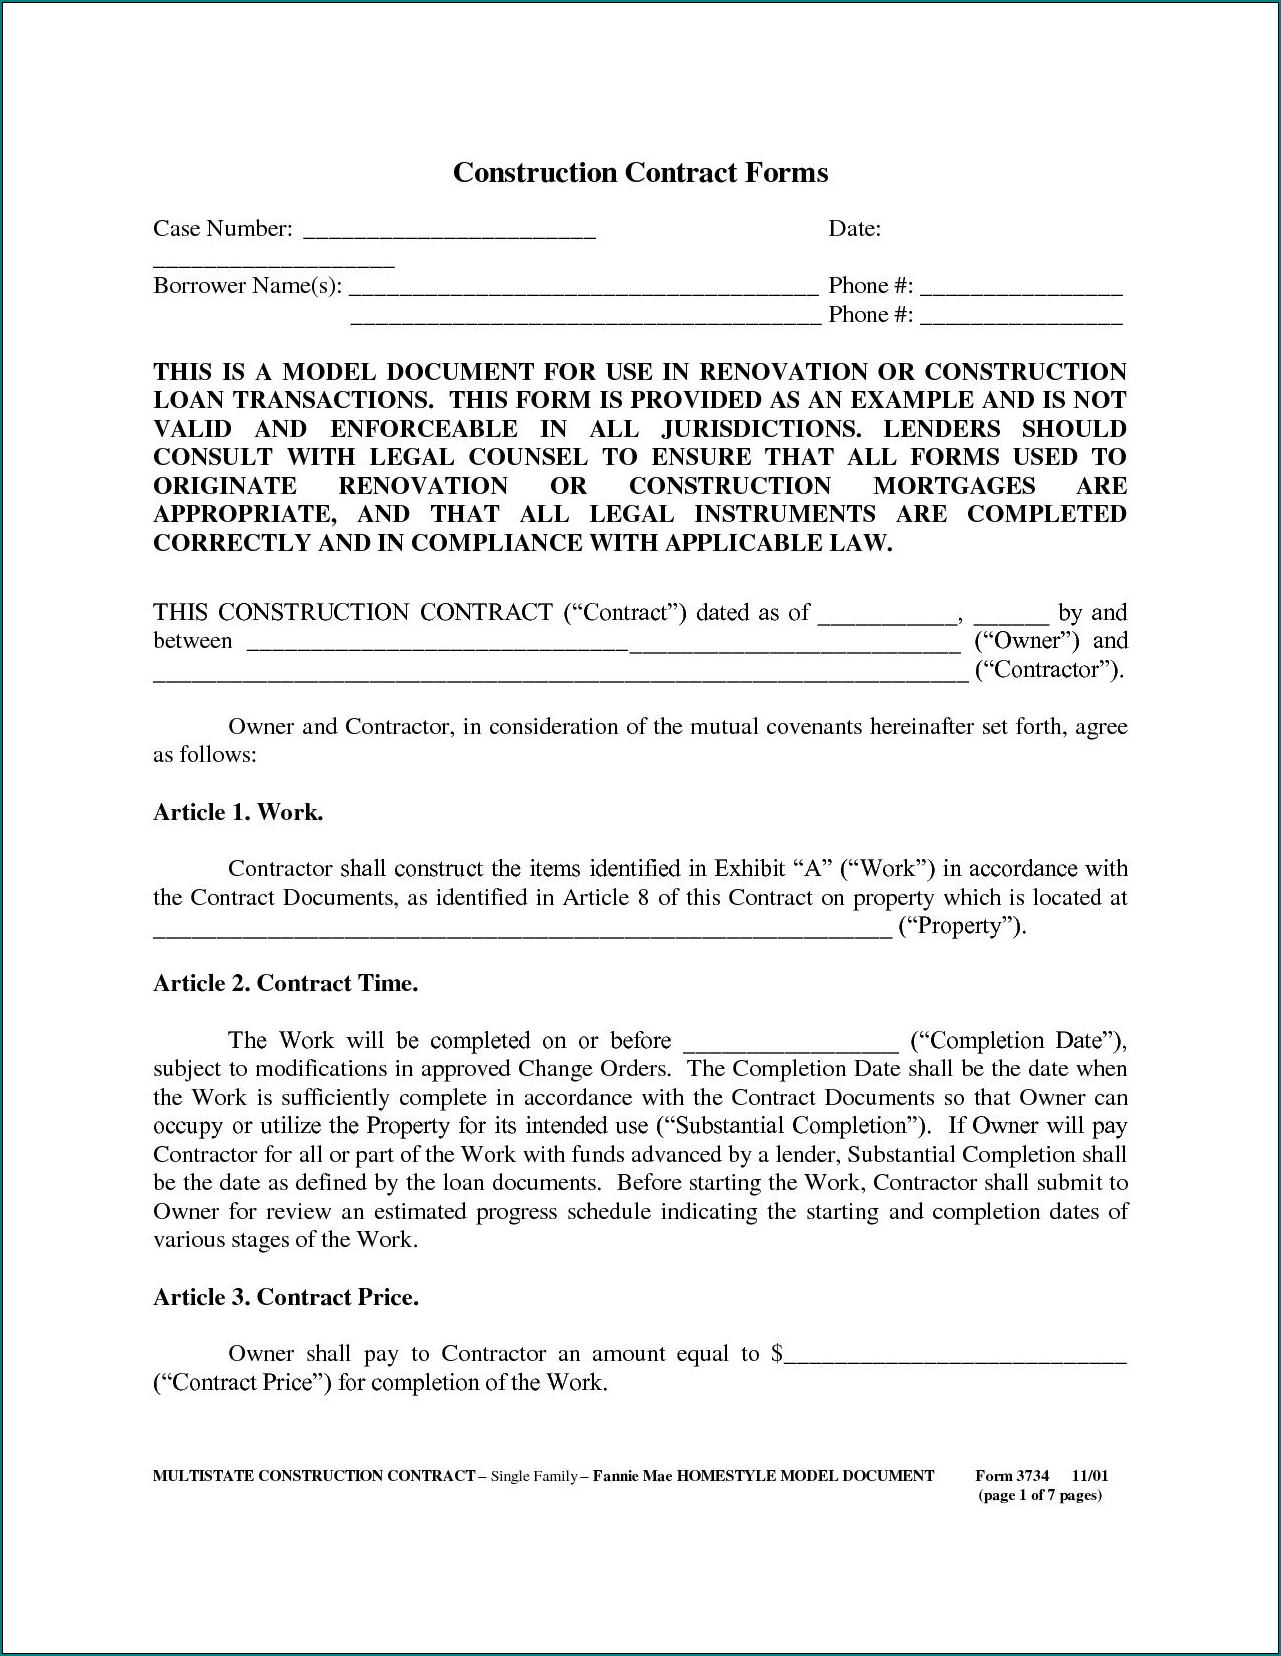 Example of Construction Contract Template